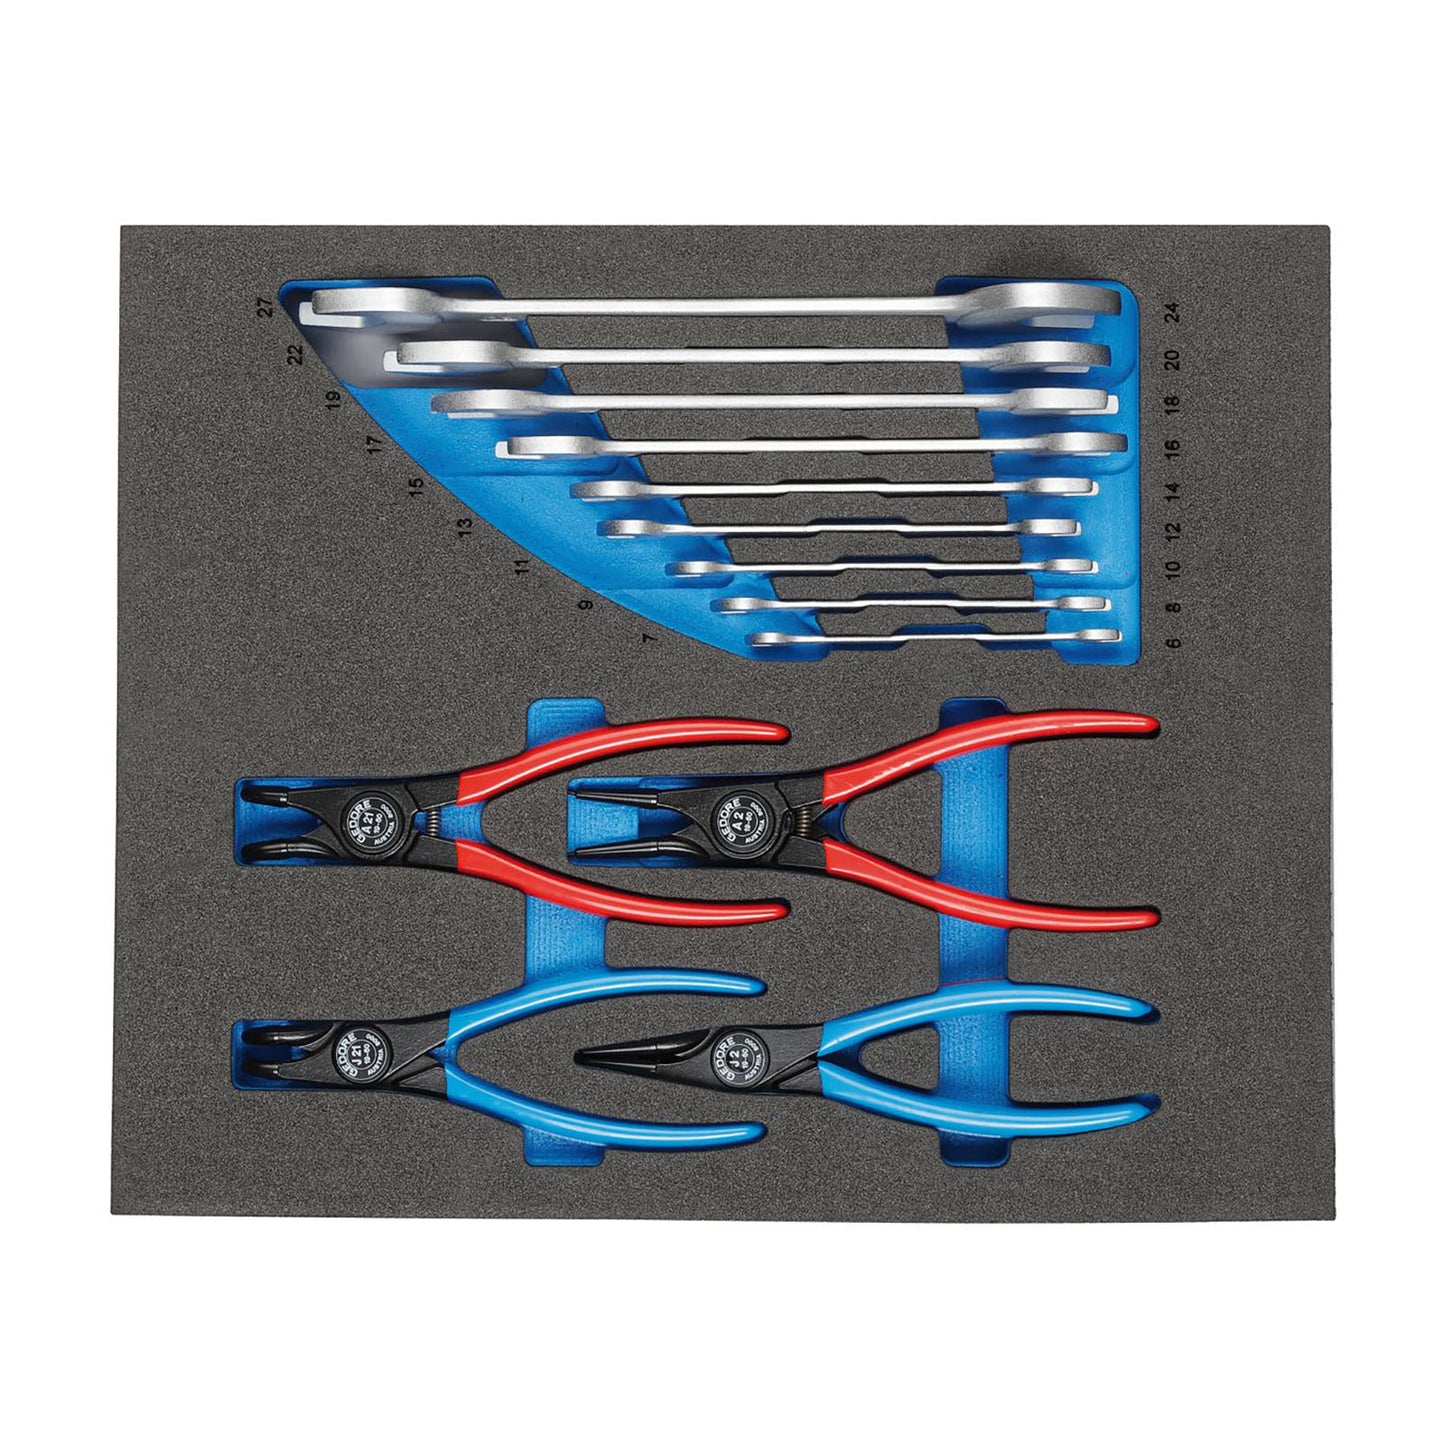 GEDORE TS CT2-6-8000 - Module CT2 pliers and wrenches (2957442)